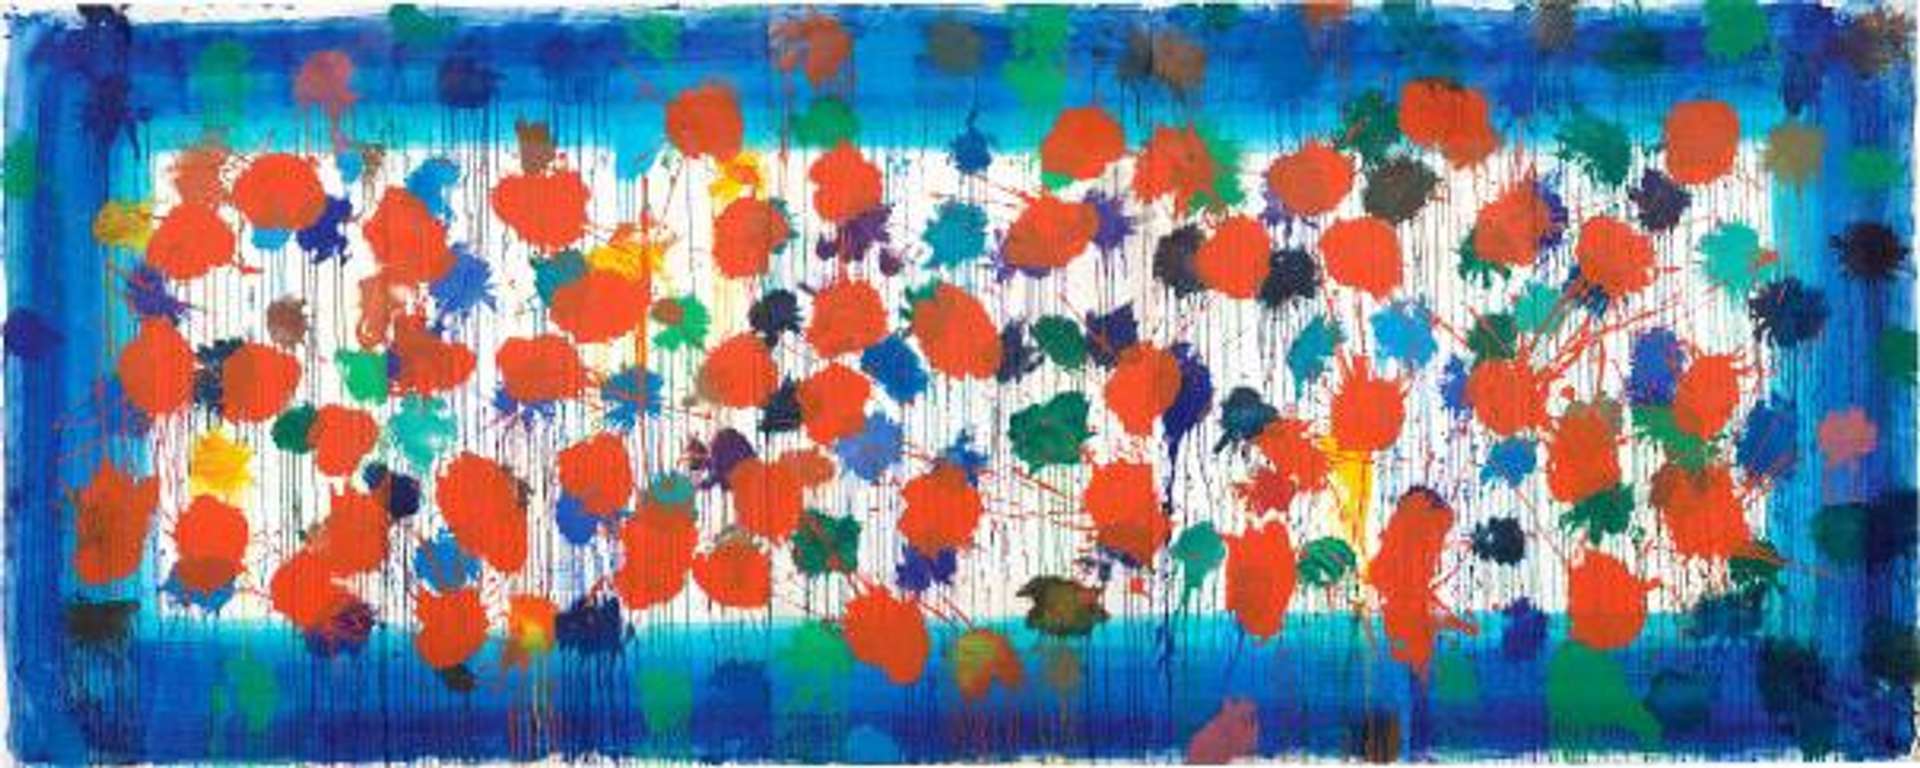 Howard Hodgkin: As Time Goes By (blue) - Signed Print